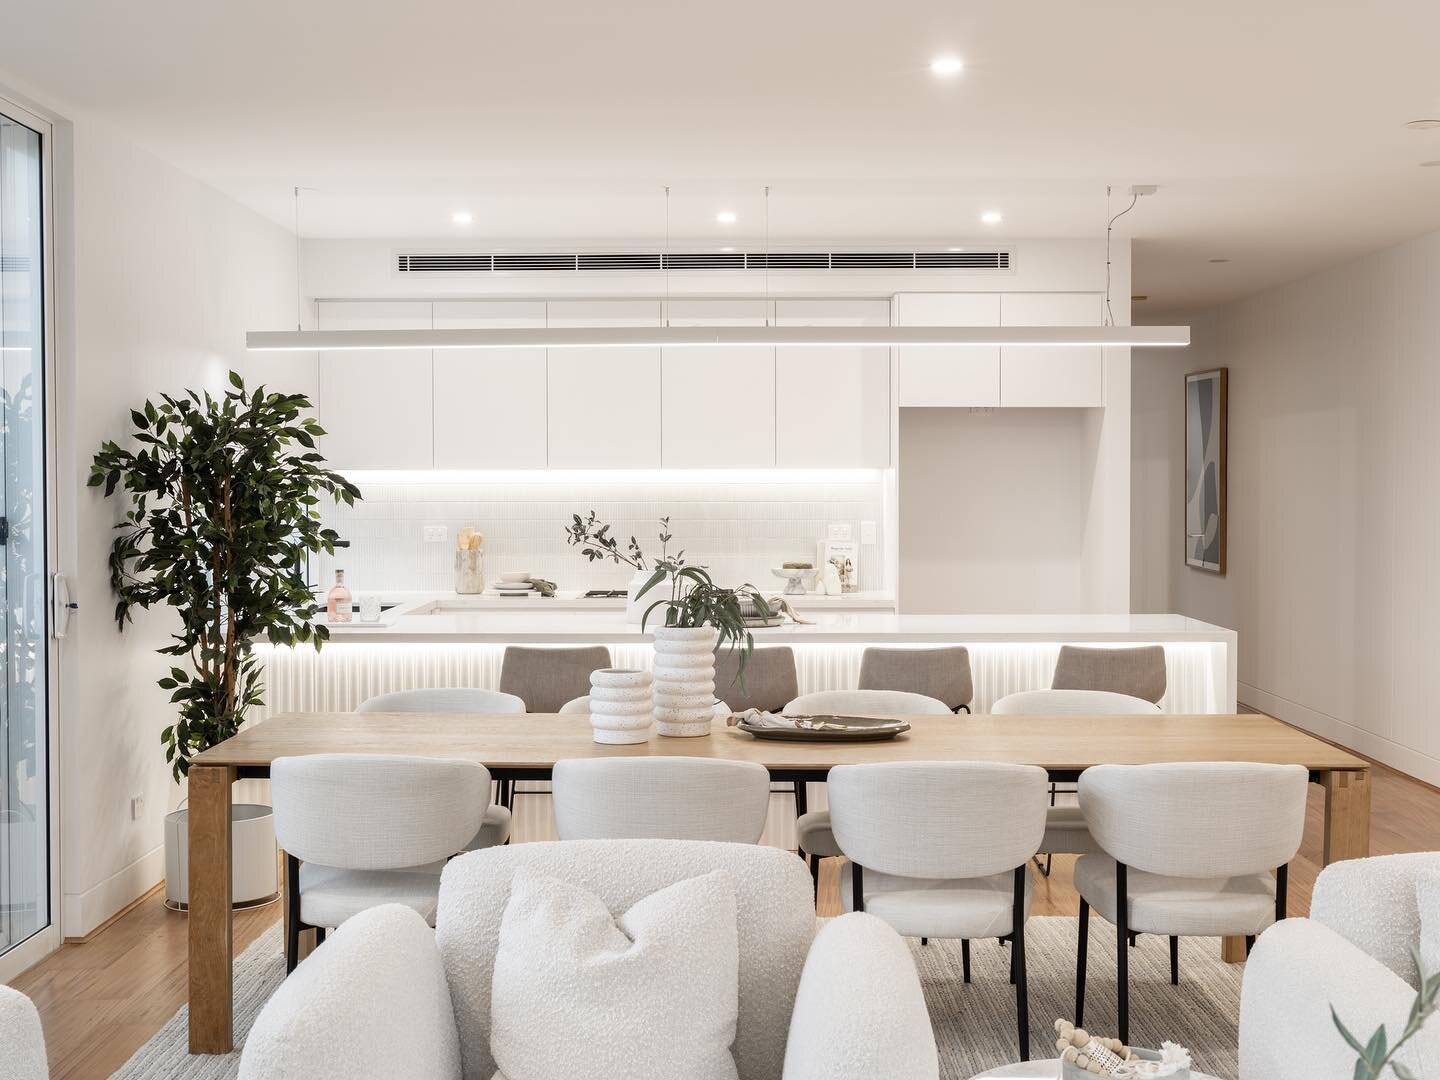 Caringbah South Dual Occupancy  #architecture #sydneyarchitecture #design #kitchendesign #homedesign #sydney #residential #architectureanddesign #kitchen #diningroom #homedecorideas #archdaily #caringbahsouth #australianhomes #sydneyhomes #dualoccupa